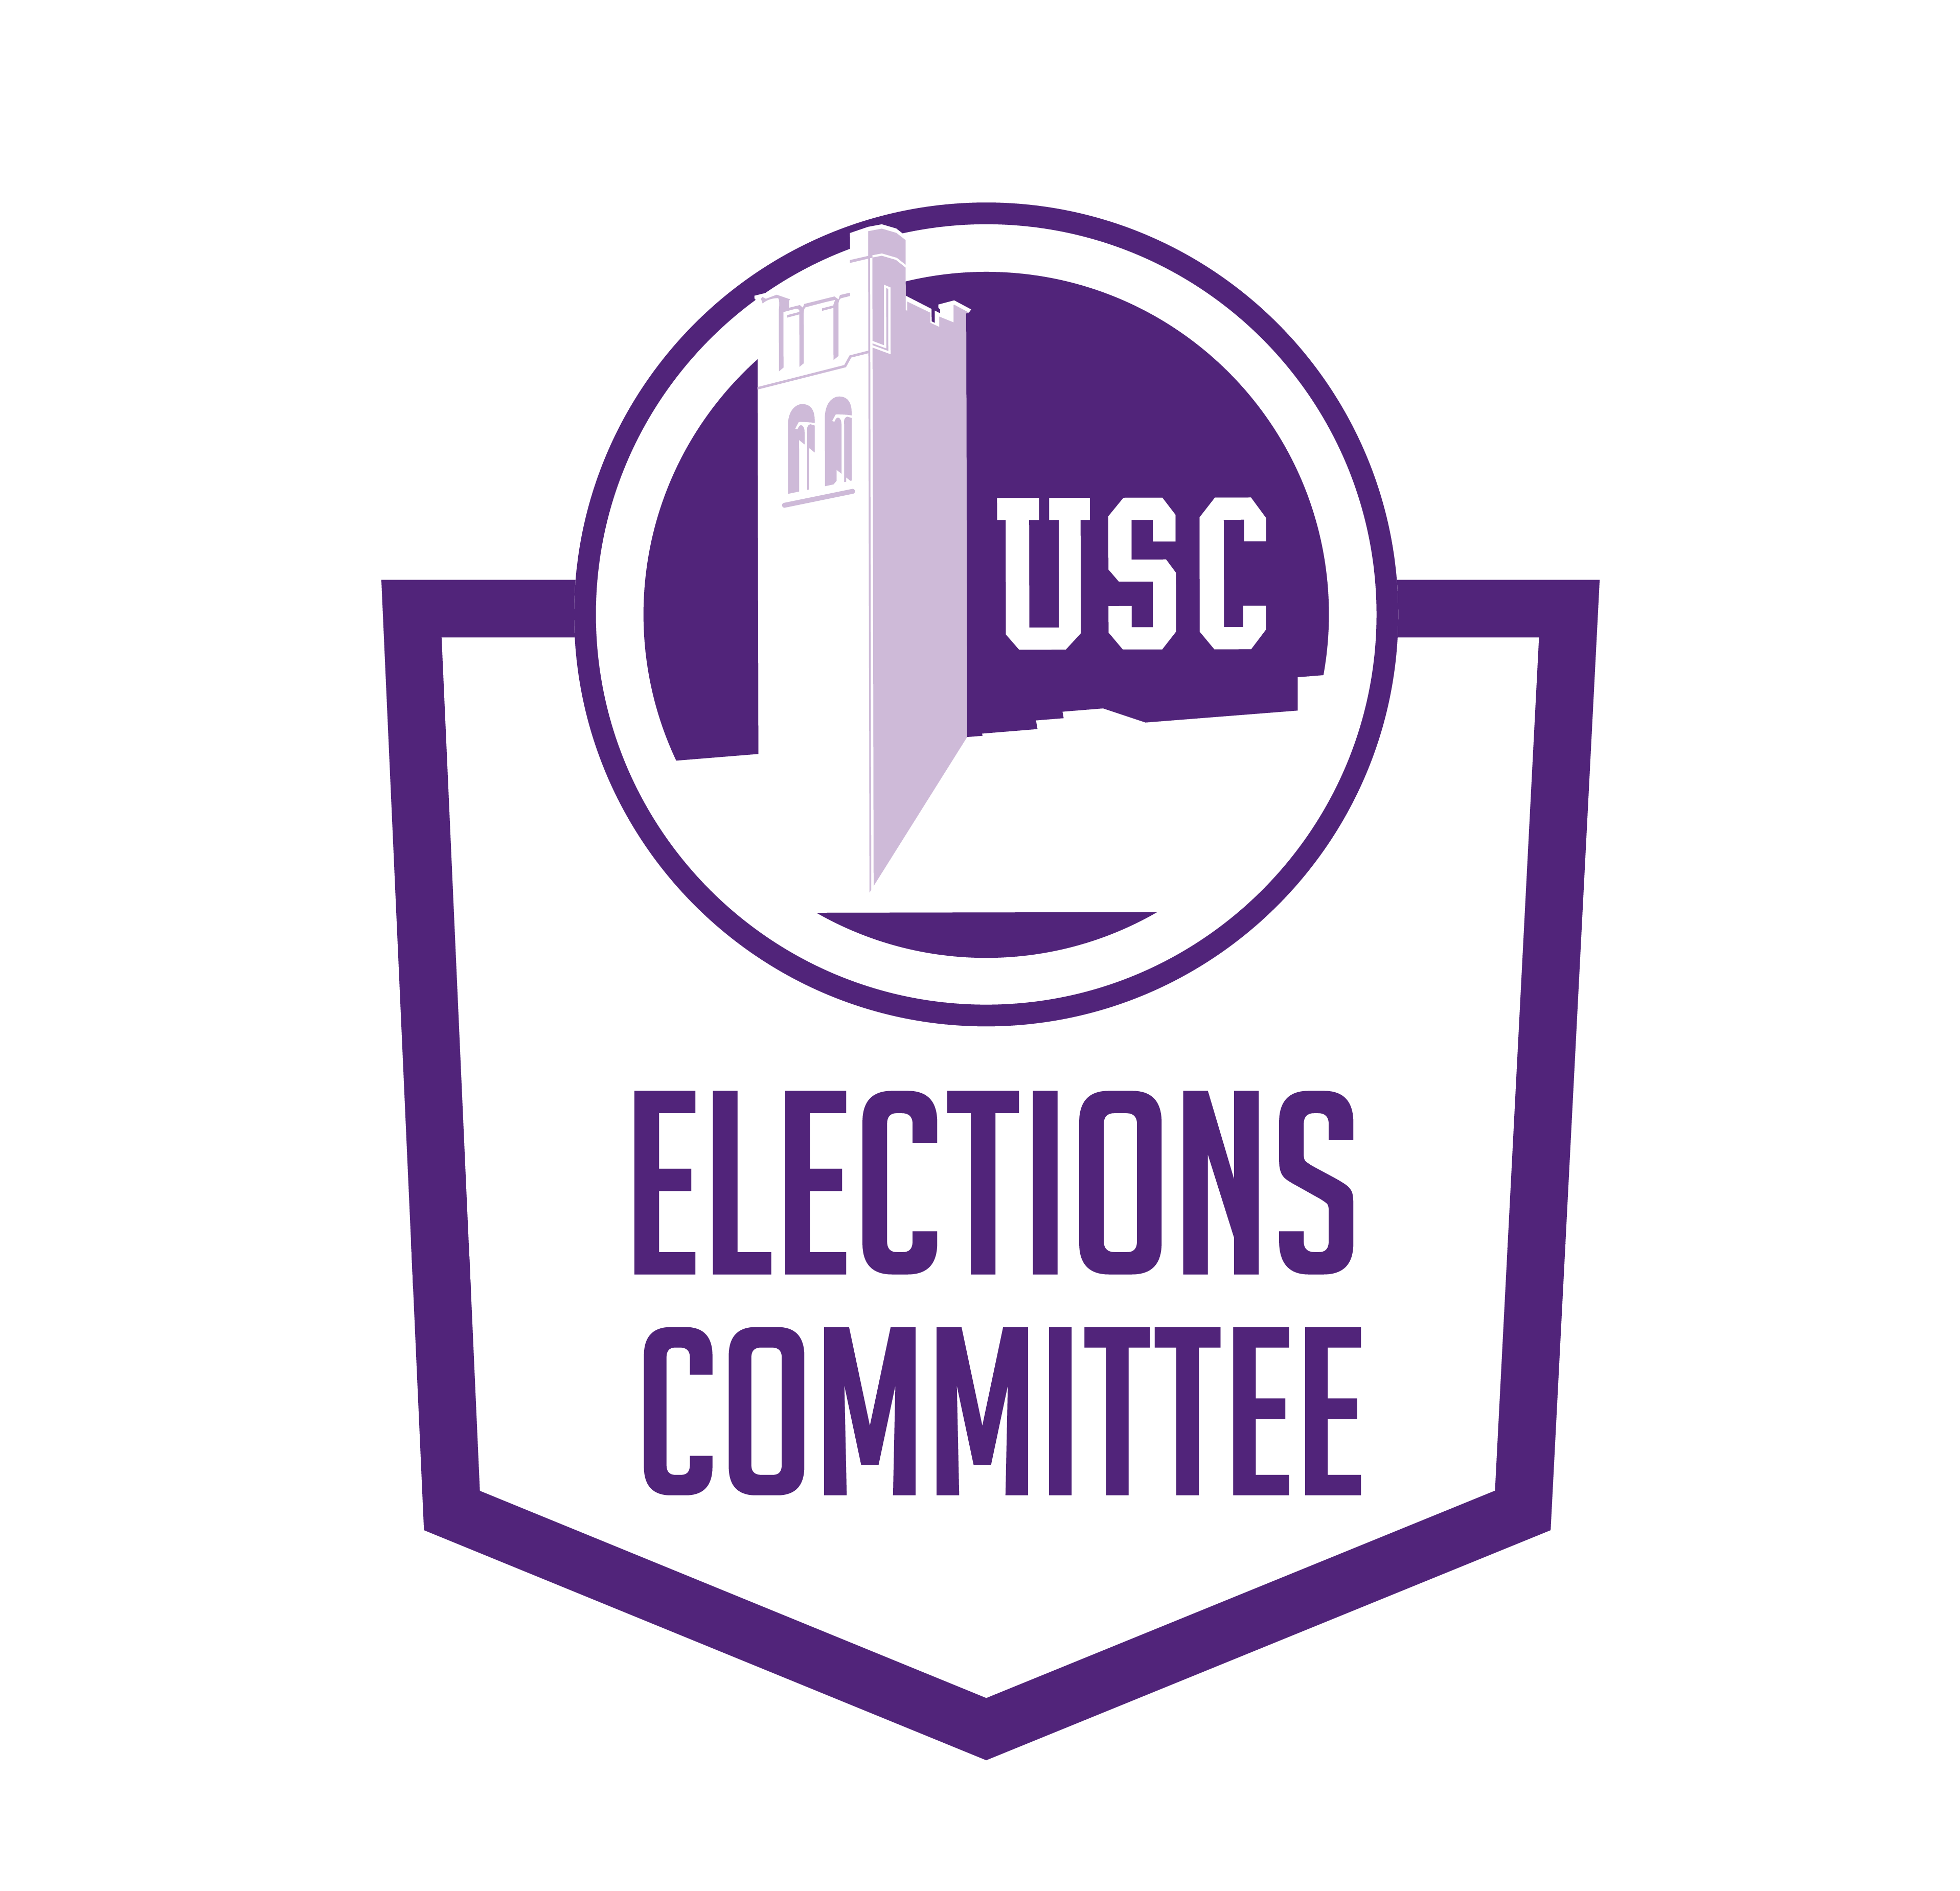 USC Elections Committee